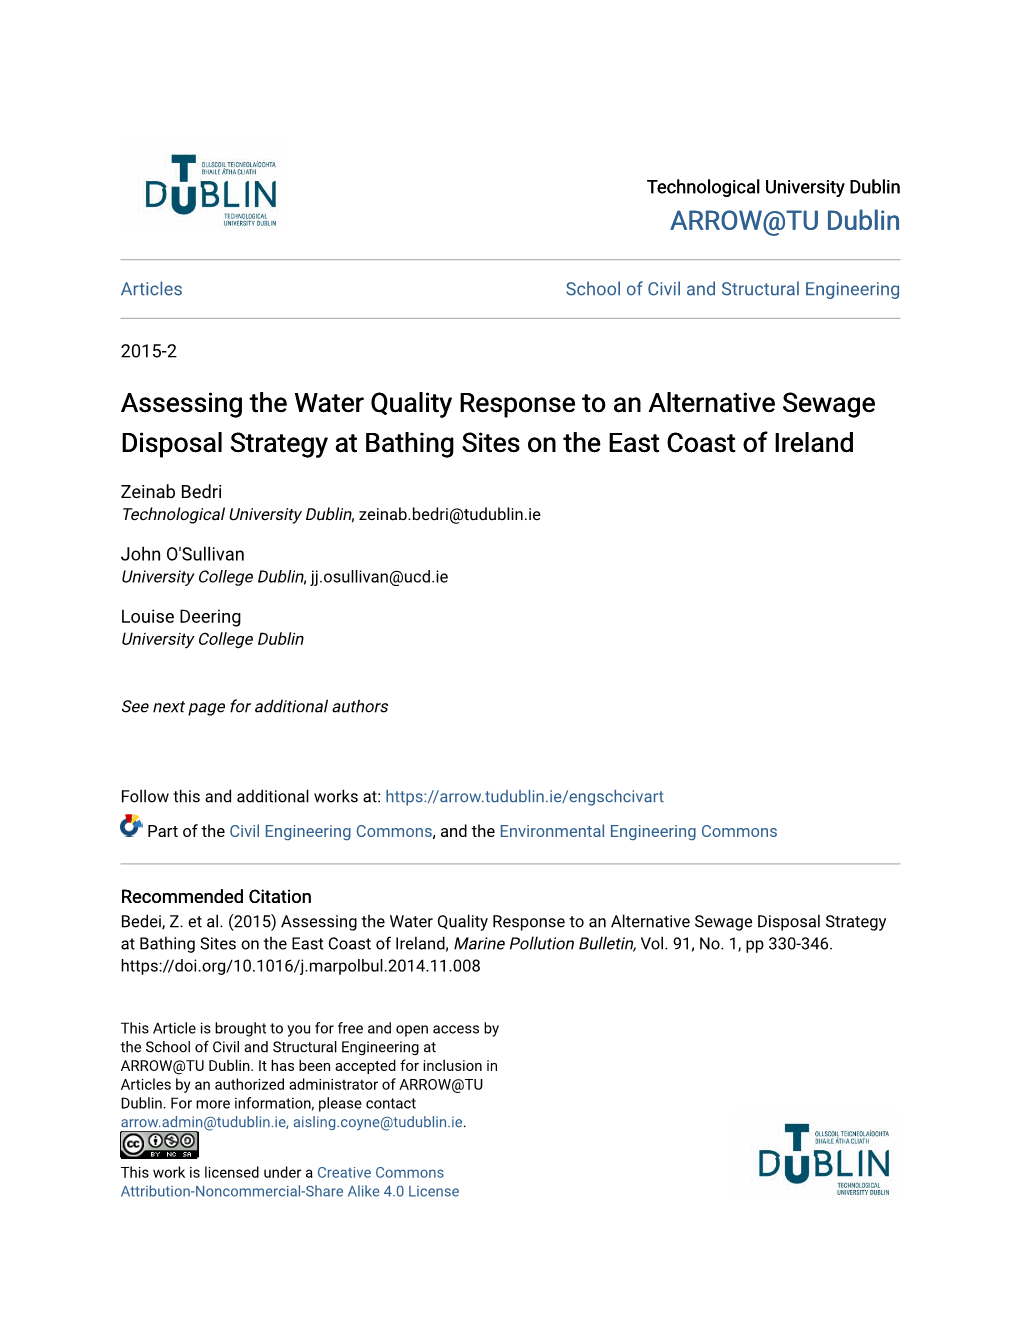 Assessing the Water Quality Response to an Alternative Sewage Disposal Strategy at Bathing Sites on the East Coast of Ireland